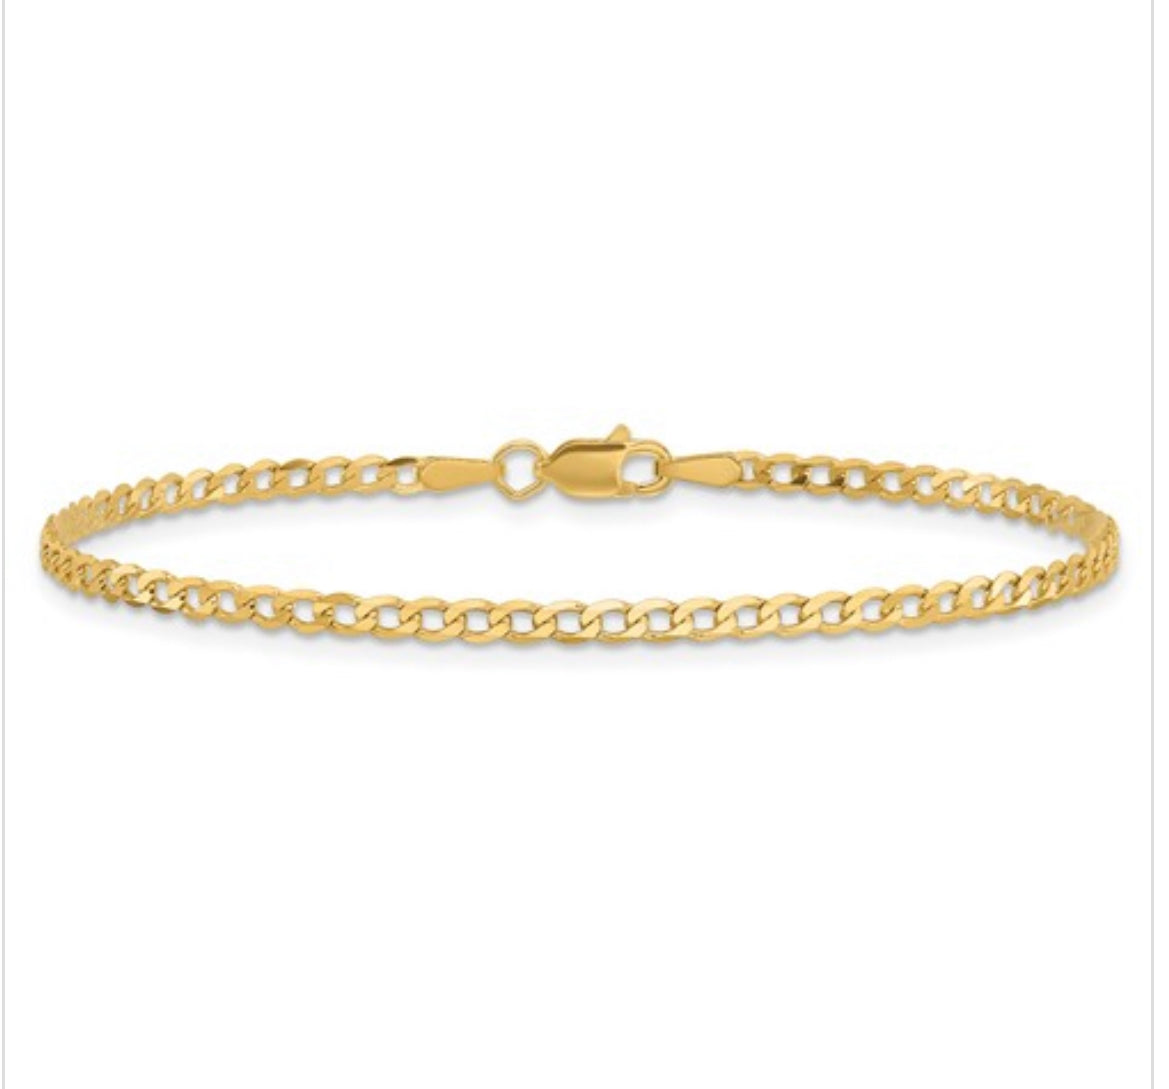 10K Yellow Gold Flat Beveled Curb Chain - 2.2mm